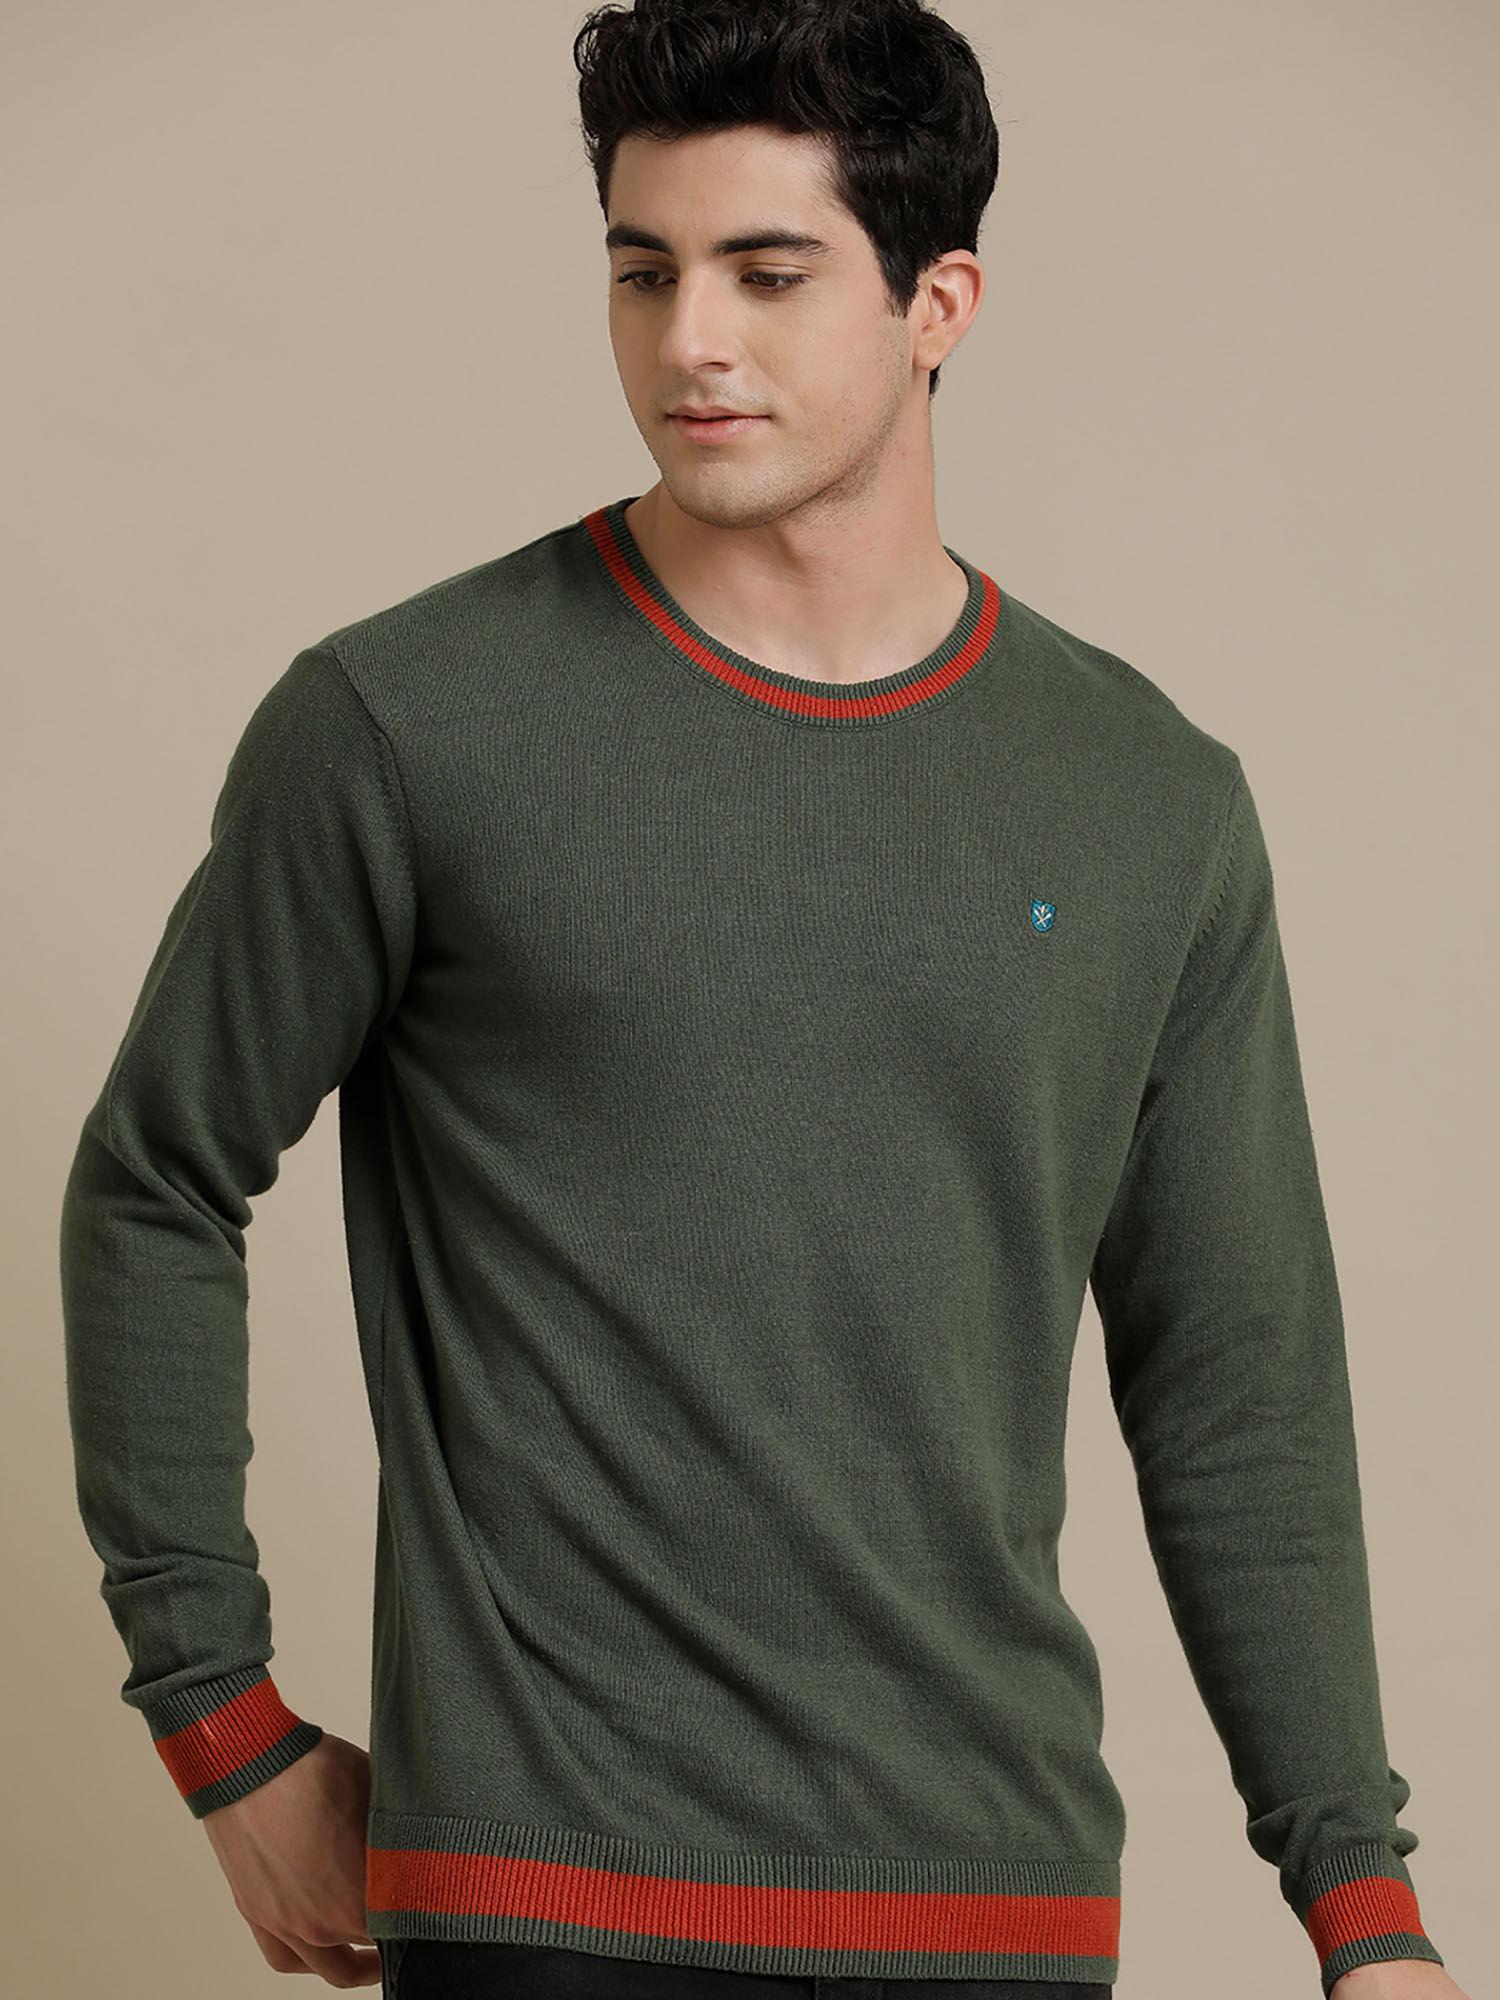 flat knit crew neck charcoal solid full sleeve t-shirt for men